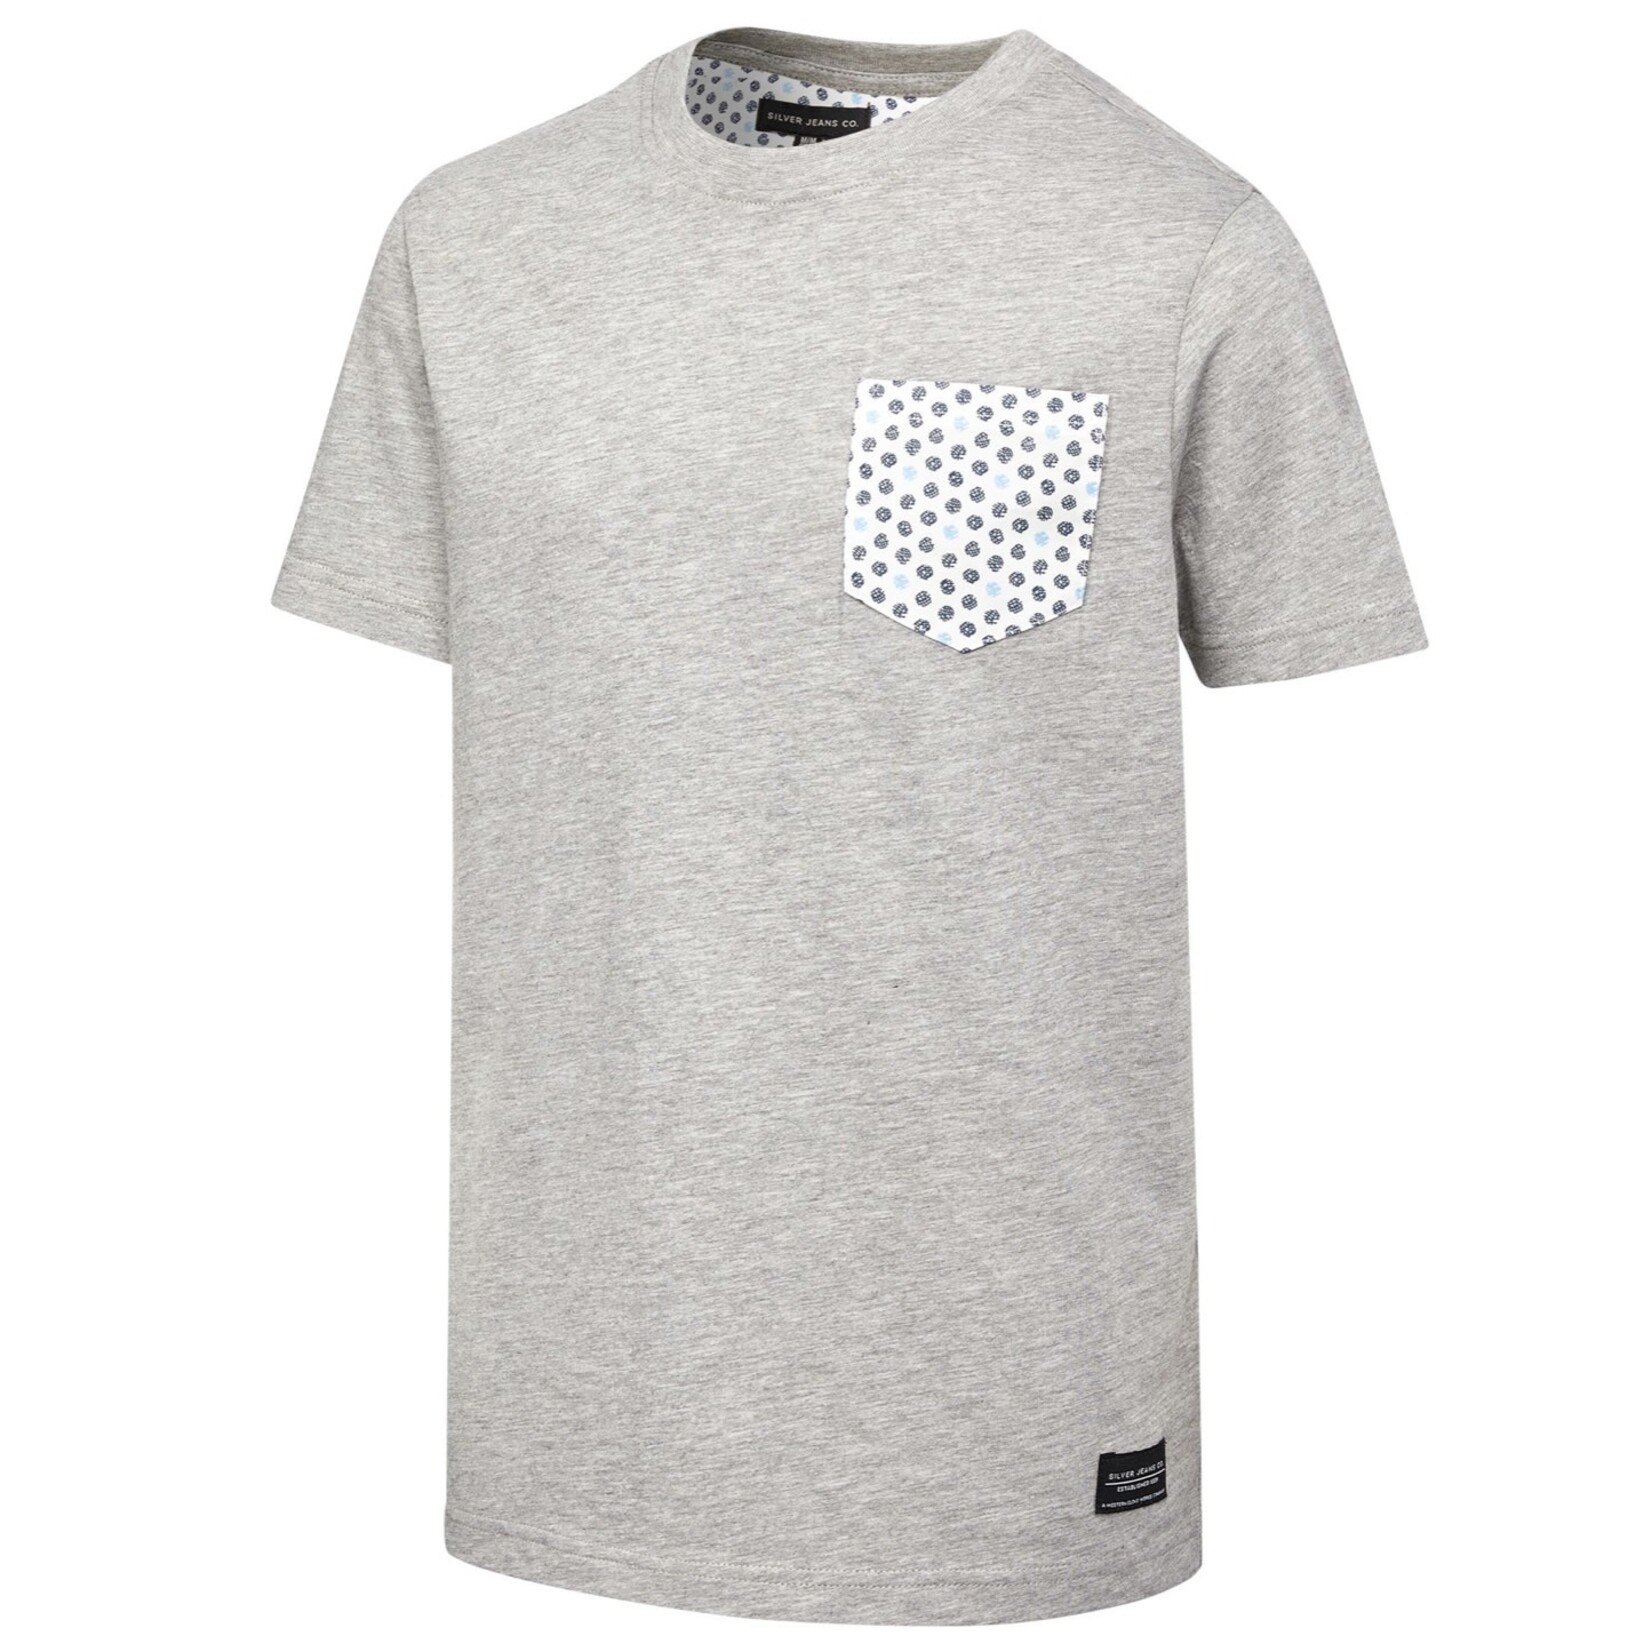 Silver Jeans Silver Jeans - Pocket Tee | Grey